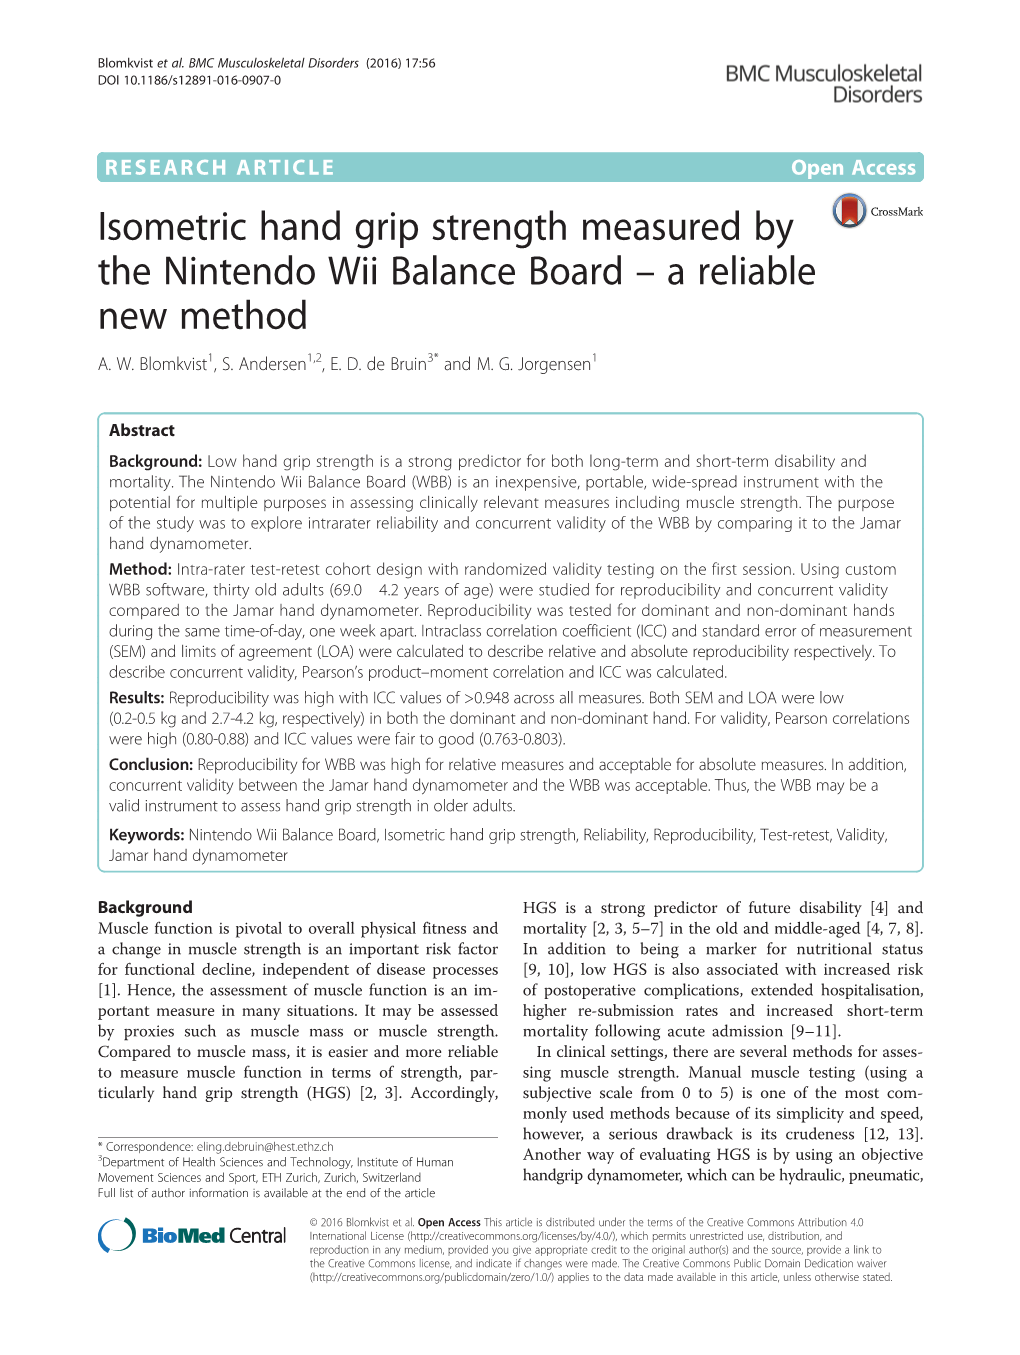 Isometric Hand Grip Strength Measured by the Nintendo Wii Balance Board – a Reliable New Method A